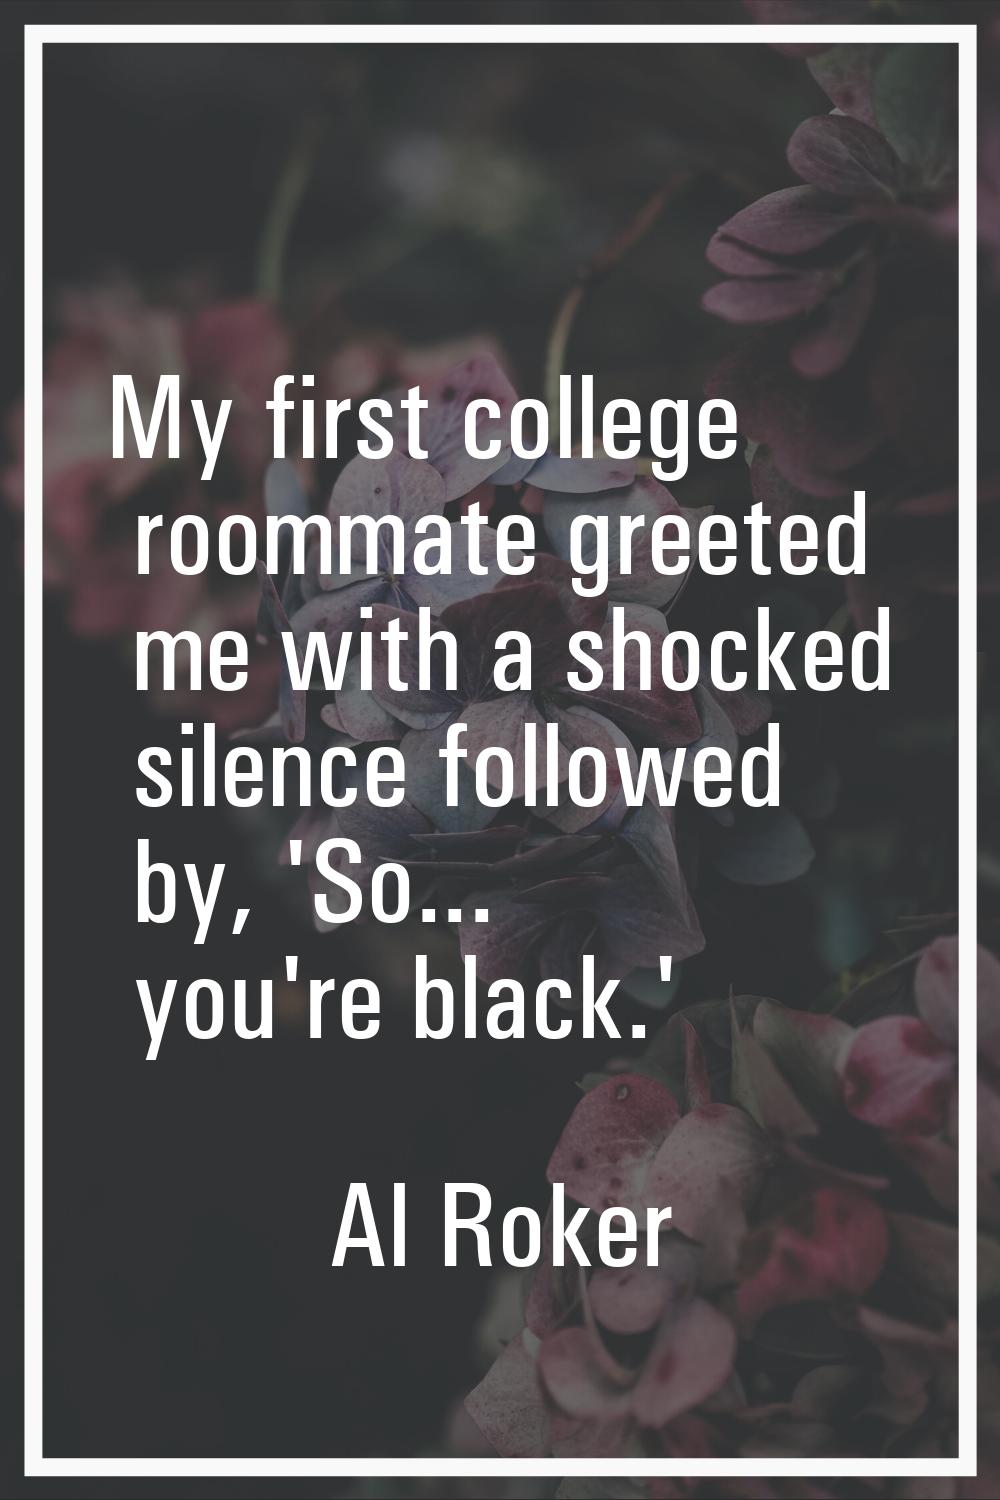 My first college roommate greeted me with a shocked silence followed by, 'So... you're black.'